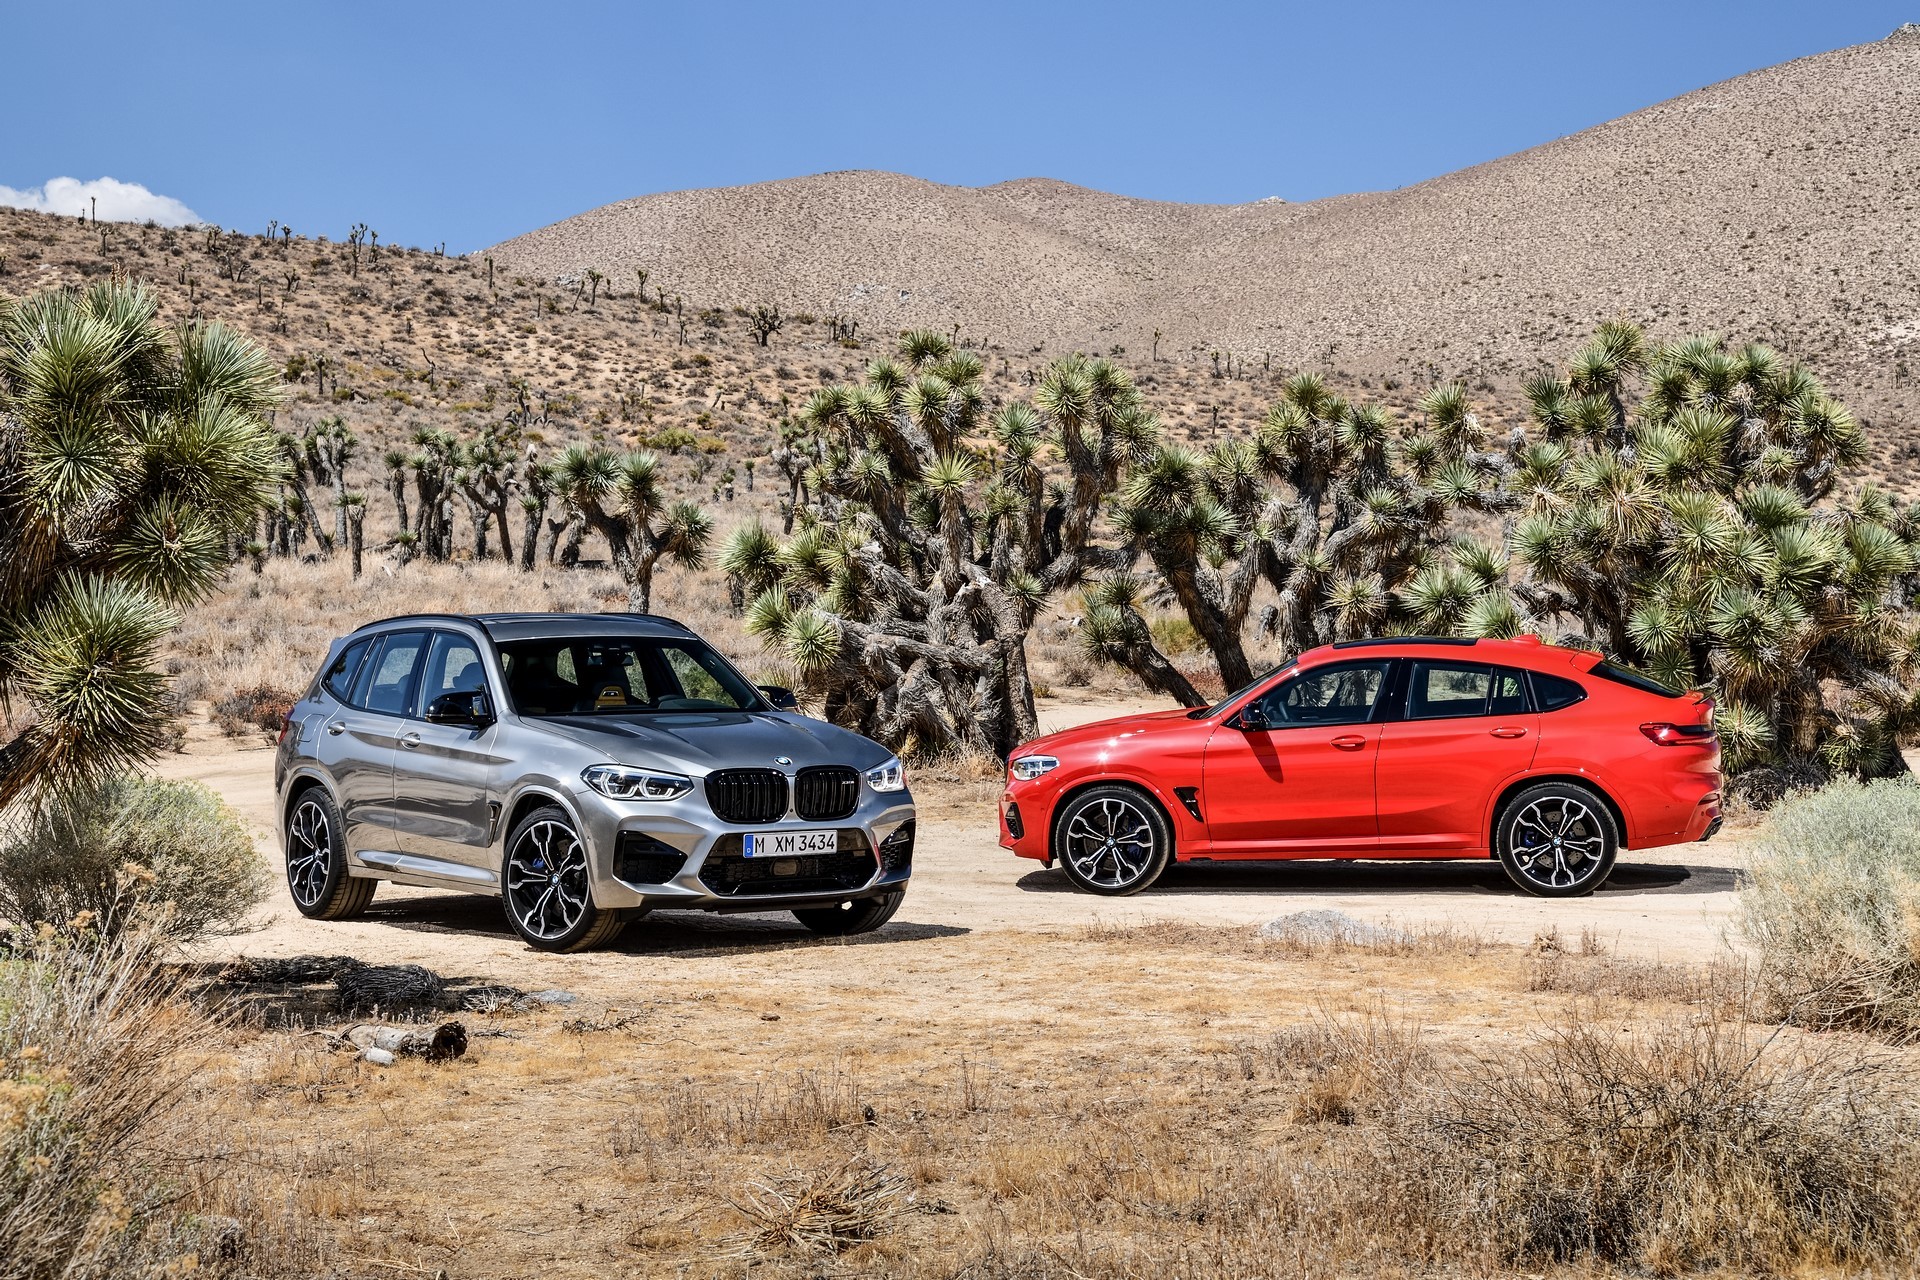 BMW X3 M and X4 M 2019 (106)